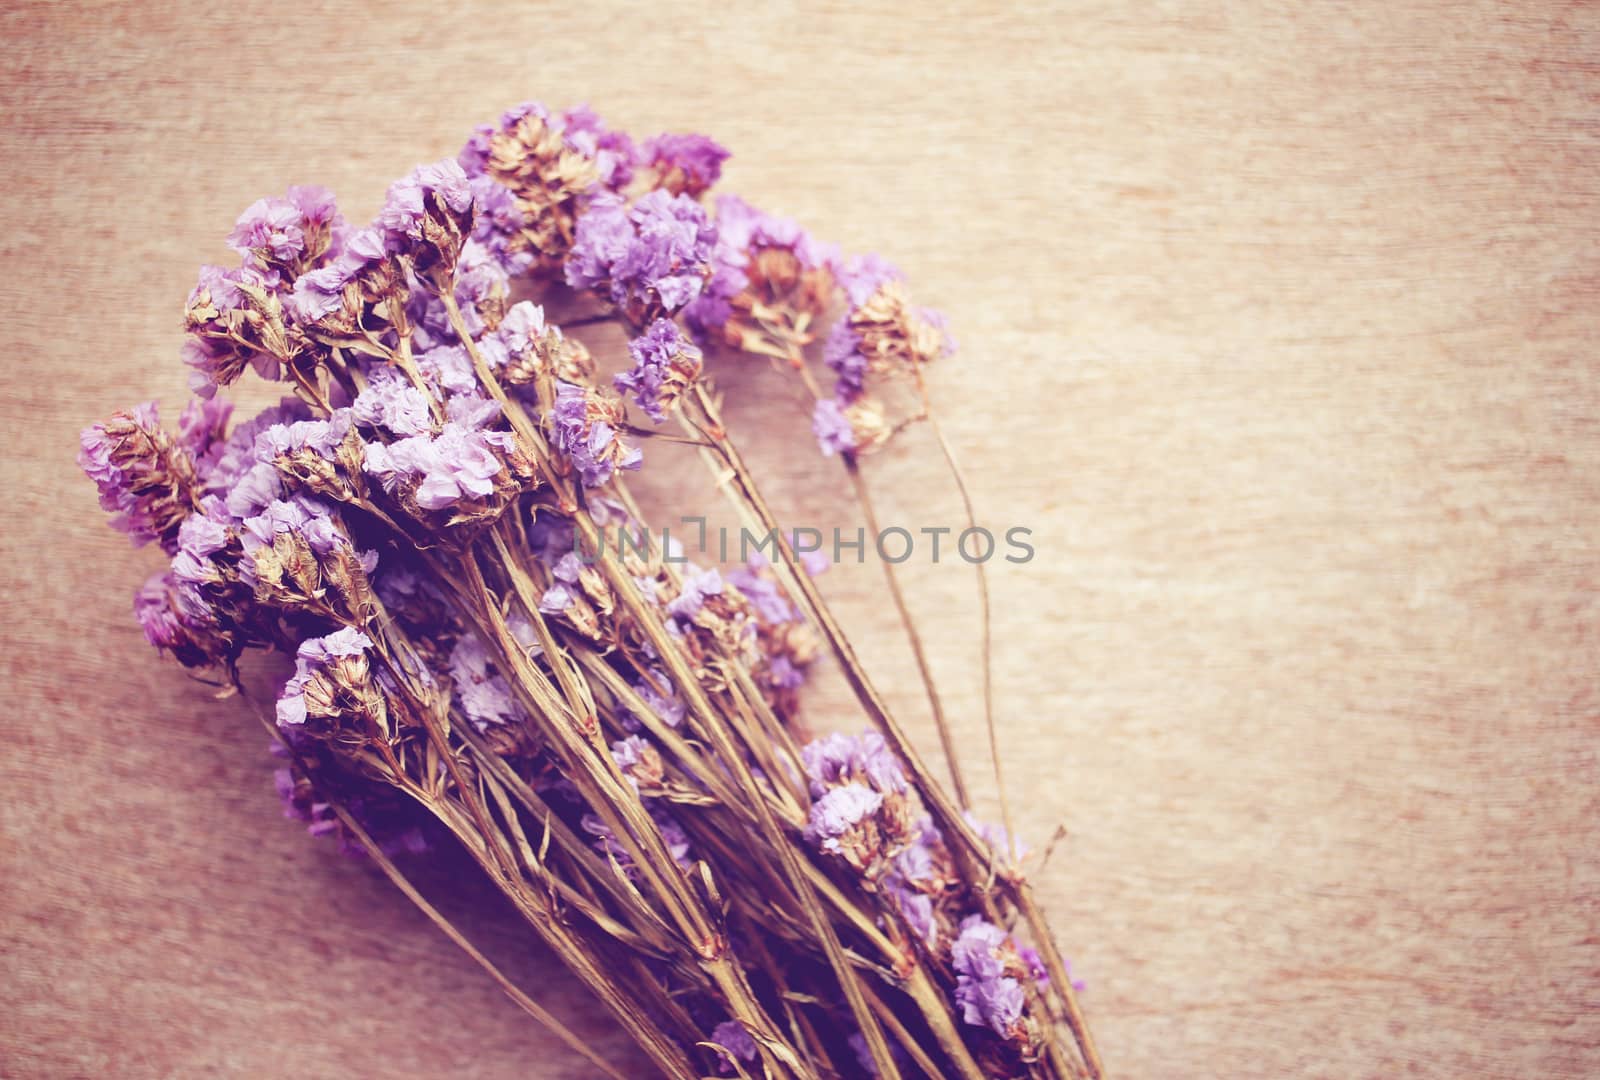 Statice flowers on wooden background with retro filter effect by nuchylee